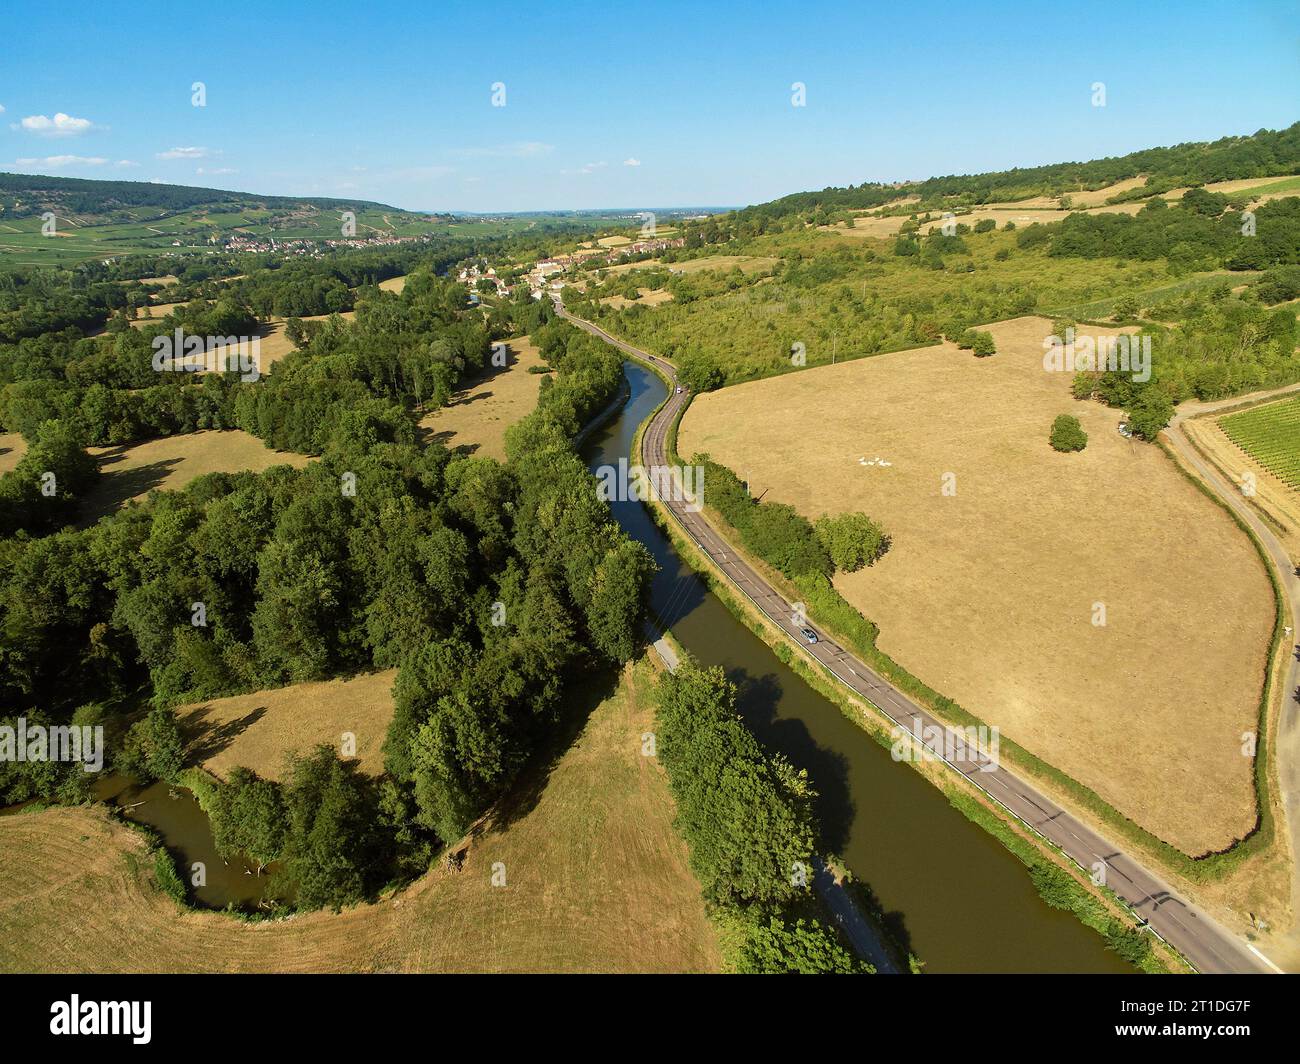 The Canal du Centre in the area of Saint Gilles and Dennevy surrounded by the vineyards of Santenay and Maranges. Stock Photo